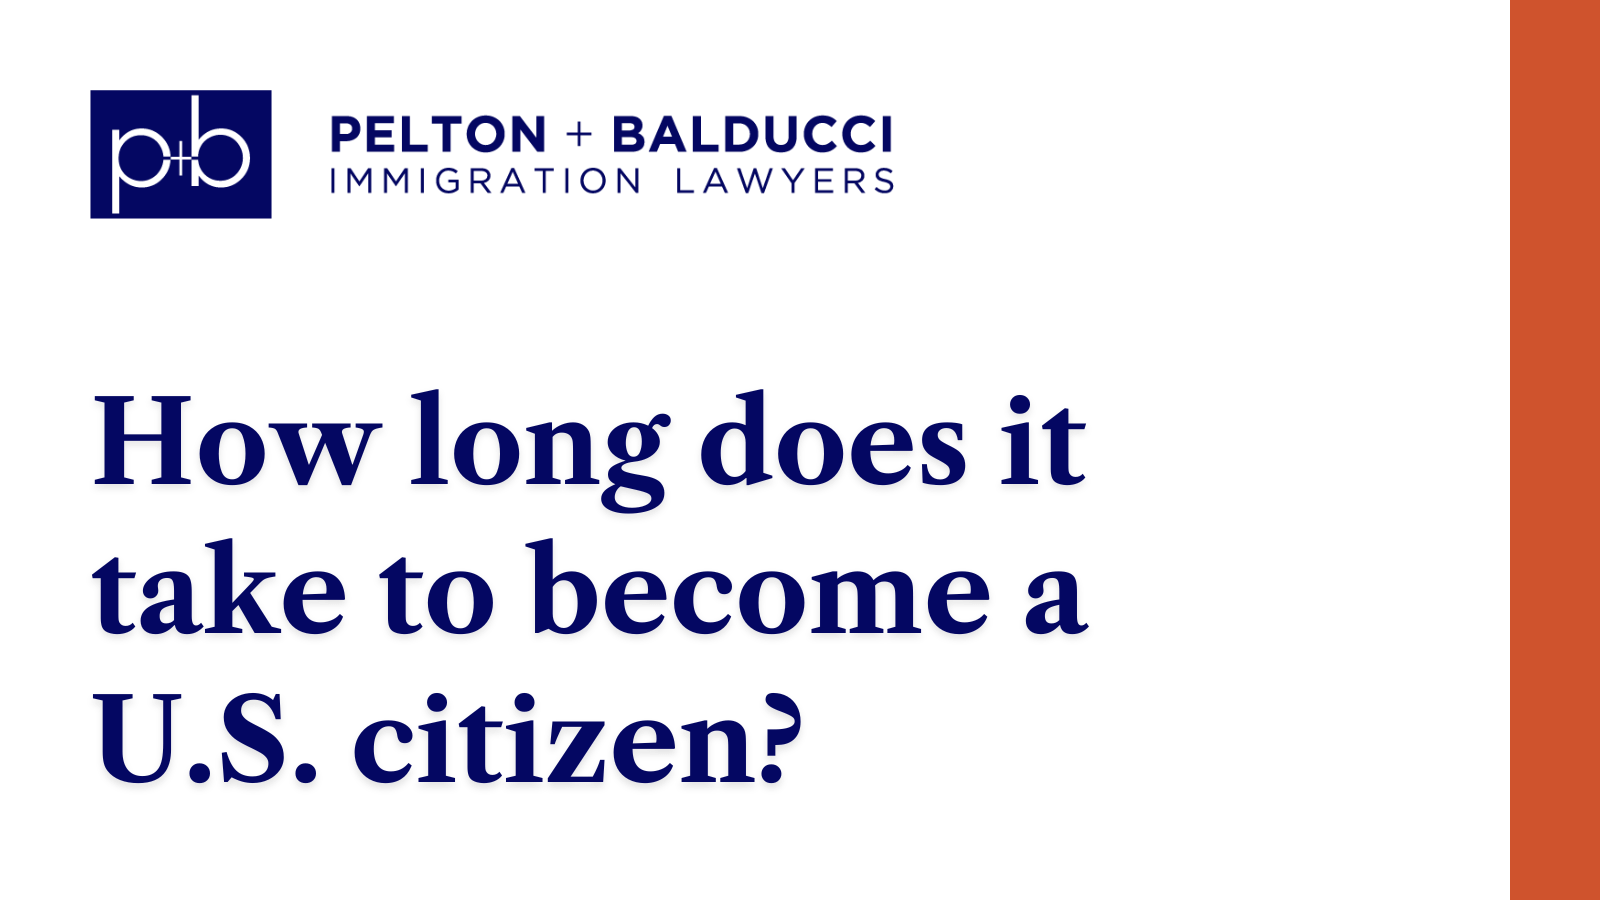 How long does it take to become a U.S. citizen - New Orleans Immigration Lawyers - Pelton Balducci